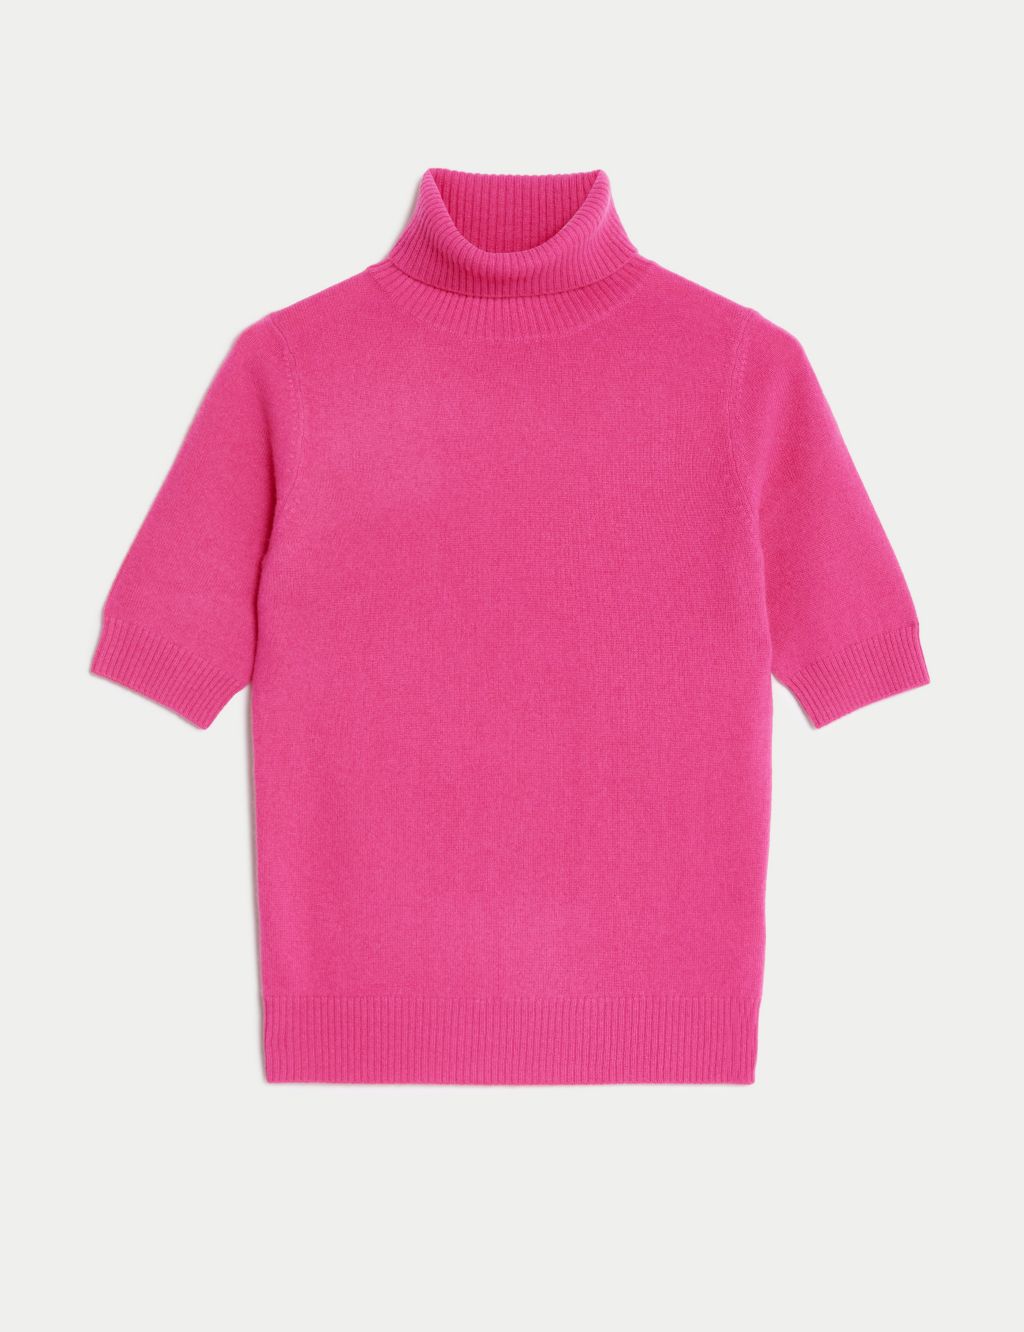 Pure Cashmere Roll Neck Knitted Top image 2